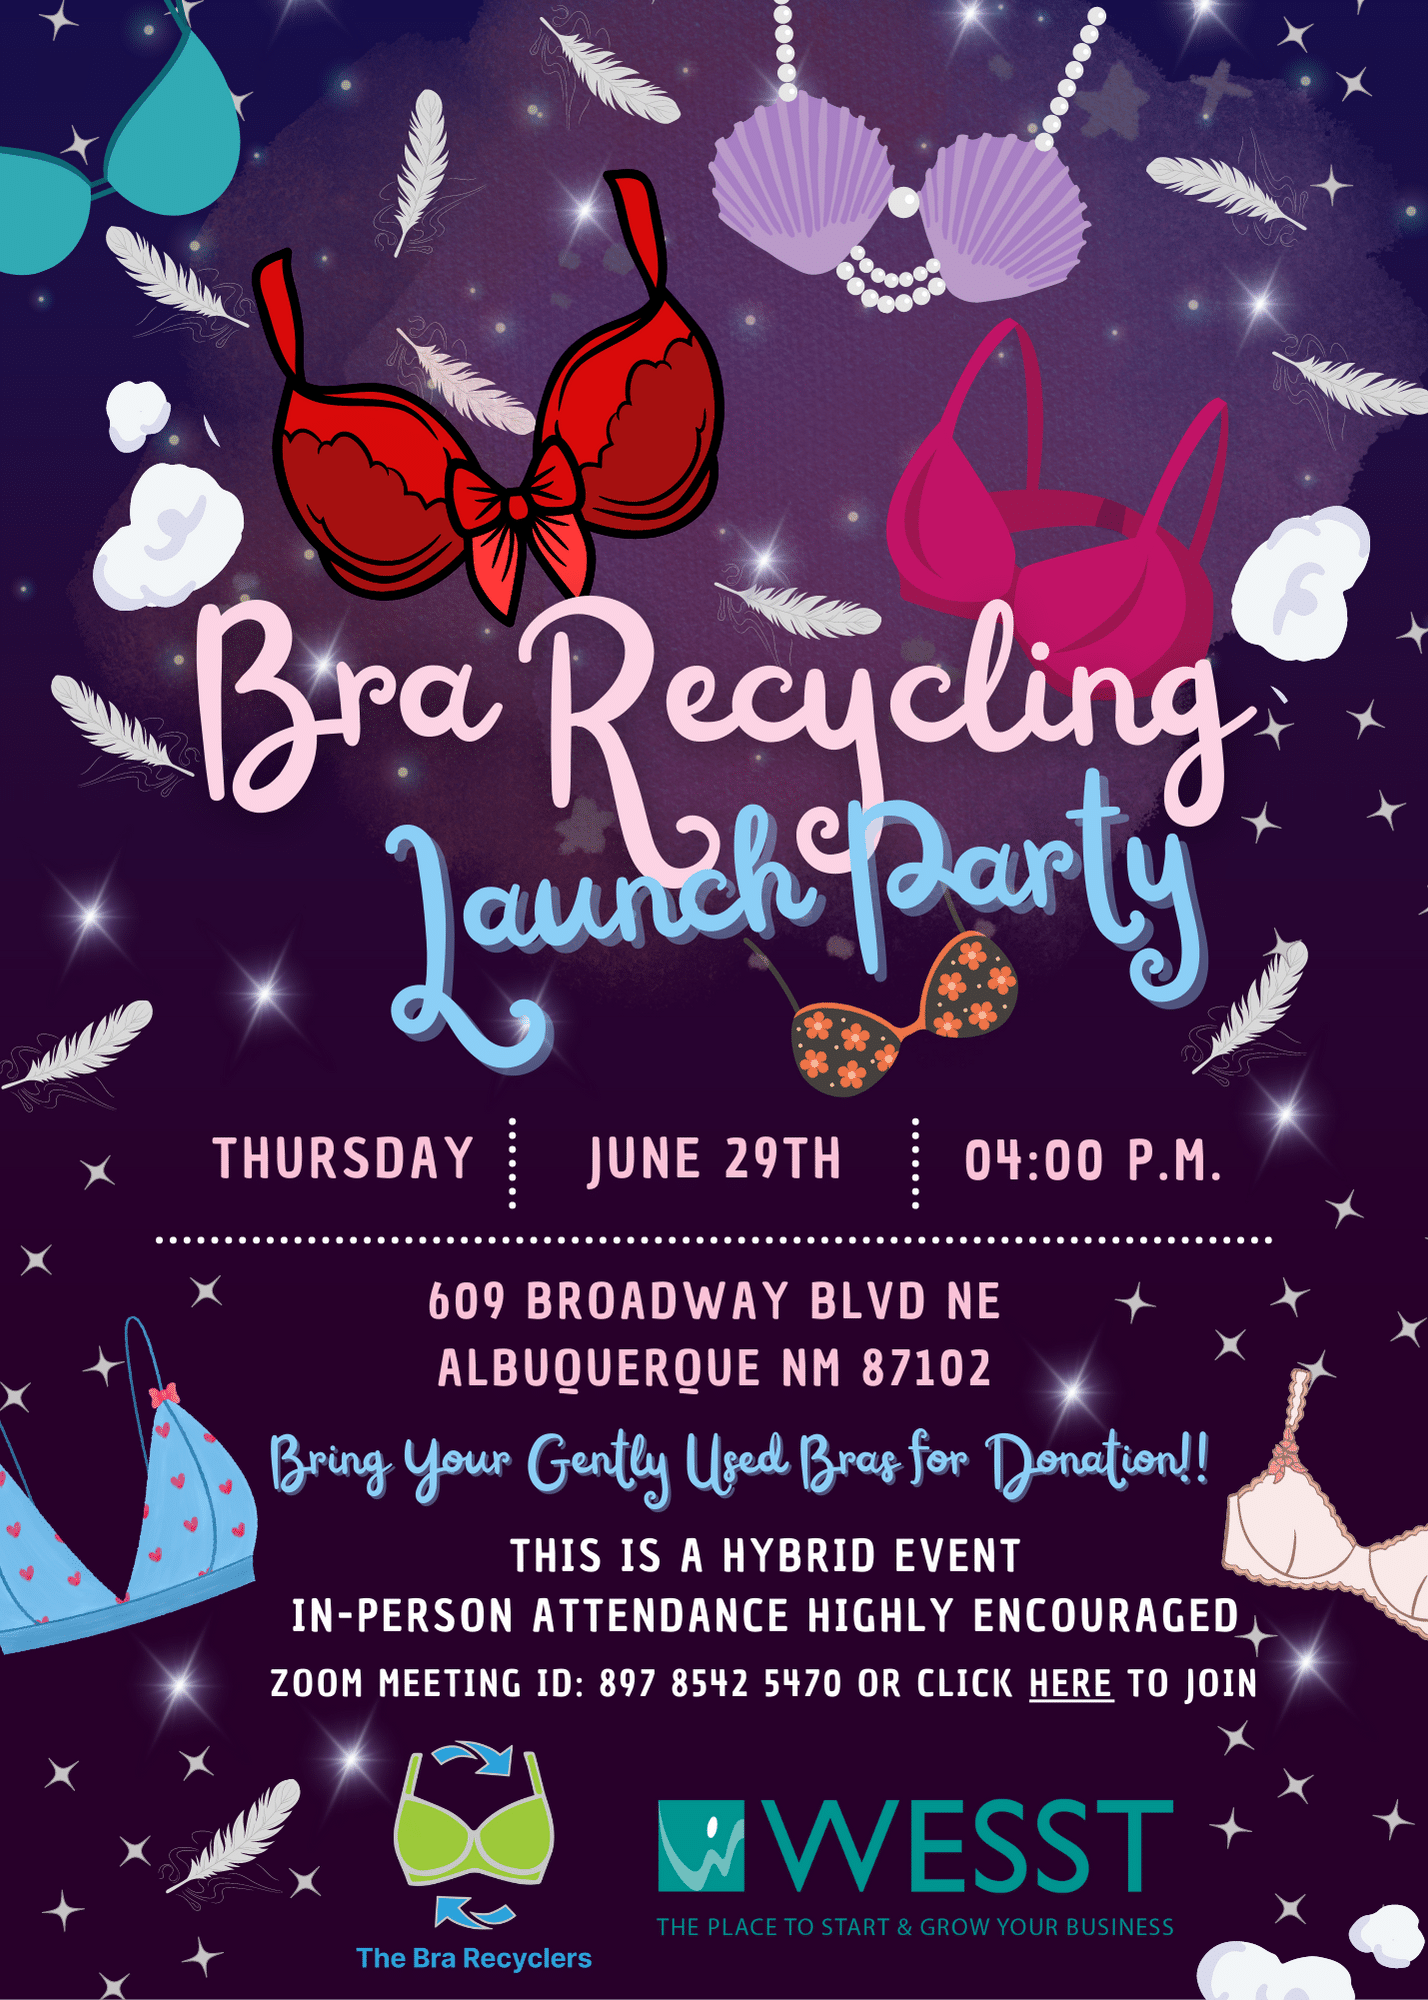 Bra Recycling Launch Party - WESST  Consulting, Training, Lending,  Incubation